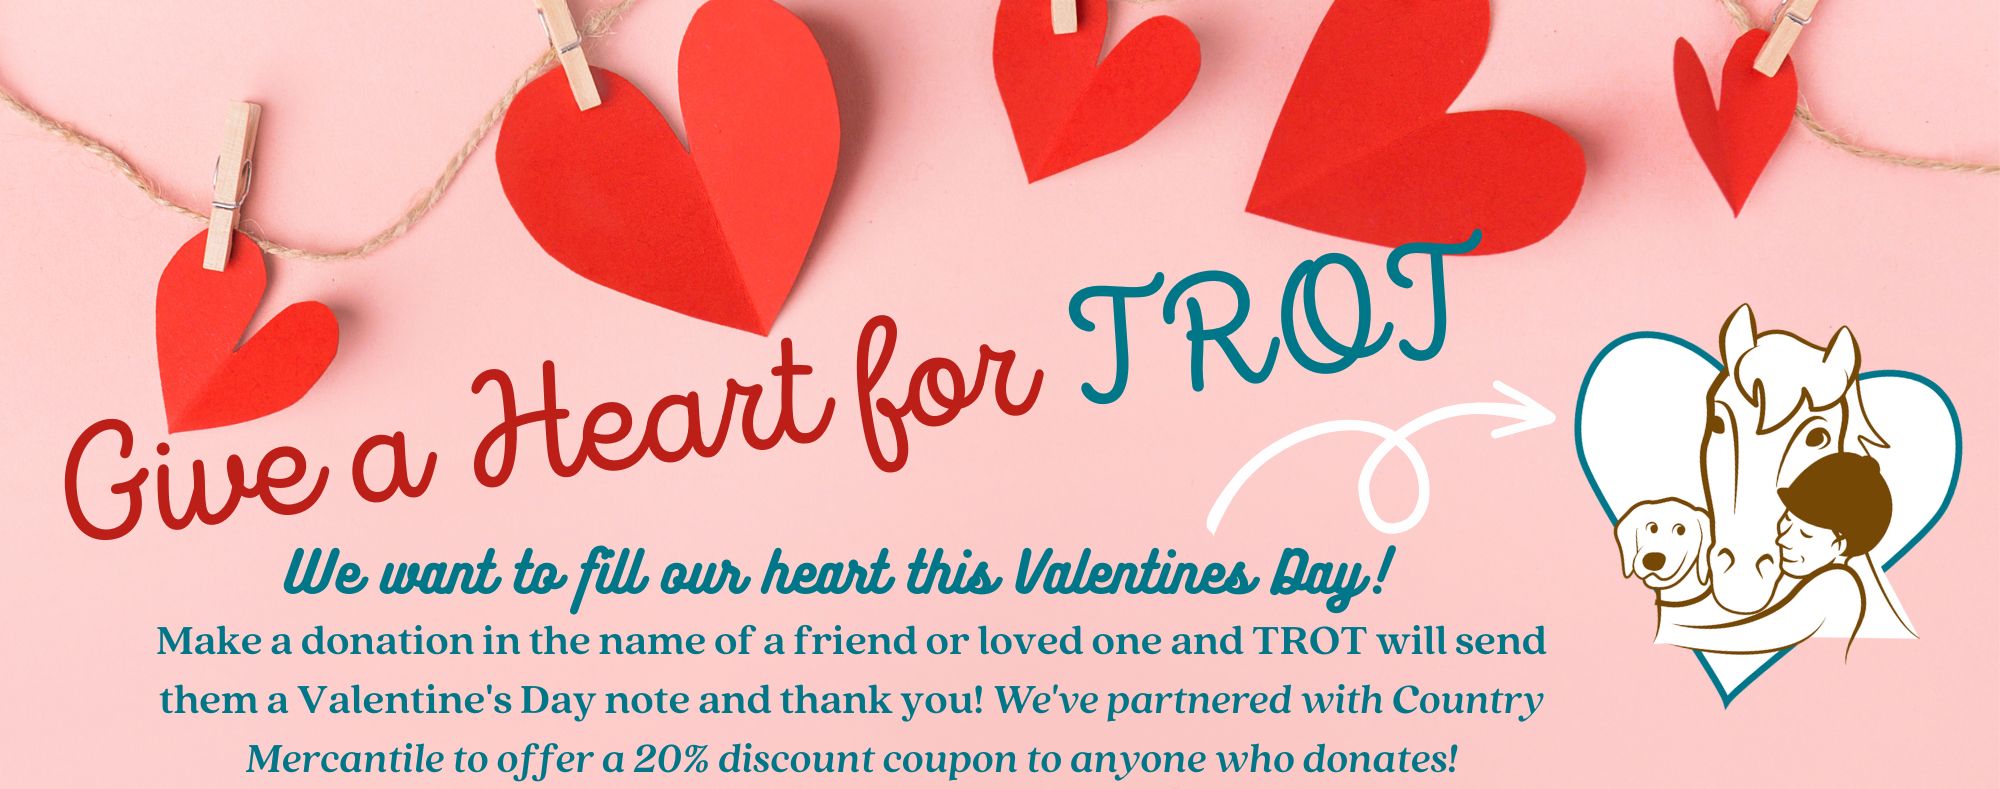 Give a Heart for TROT